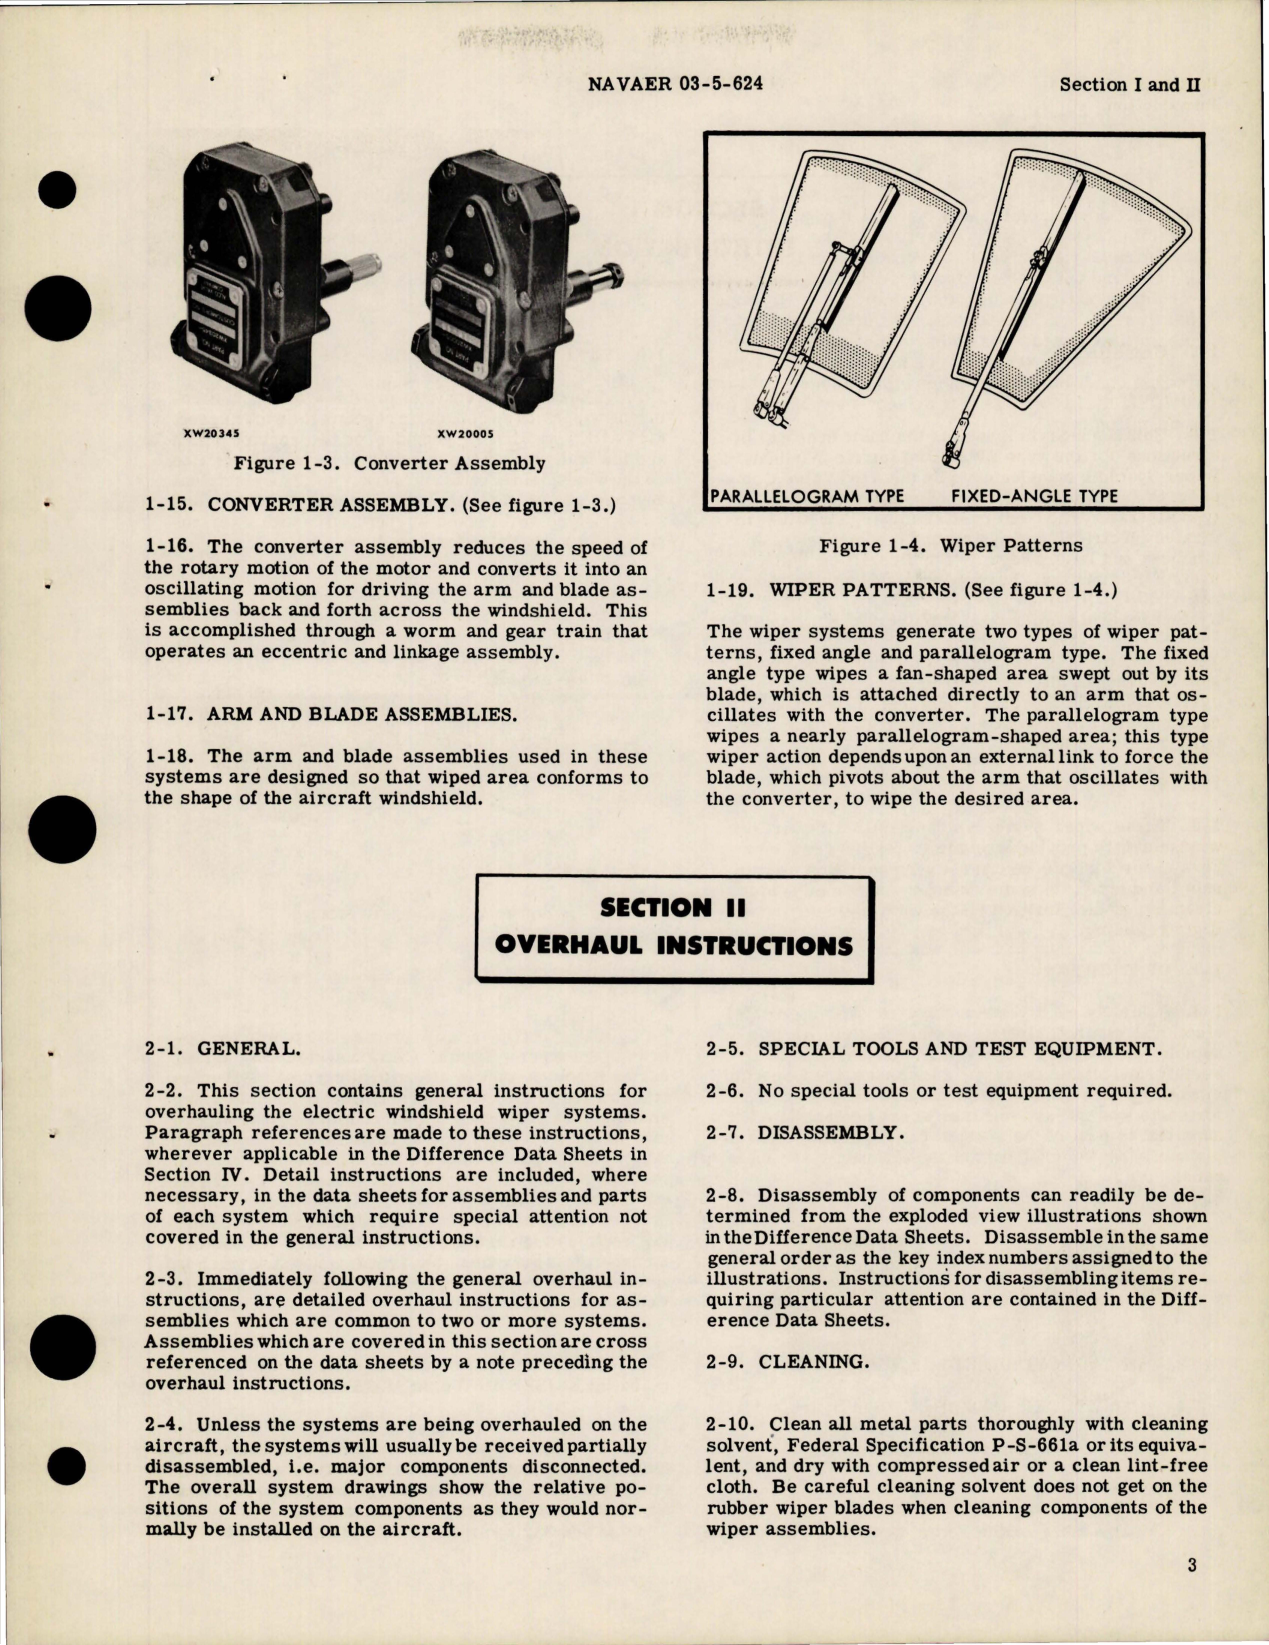 Sample page 5 from AirCorps Library document: Overhaul Instructions for Electric Windshield Wiper Systems XW20101 Series 